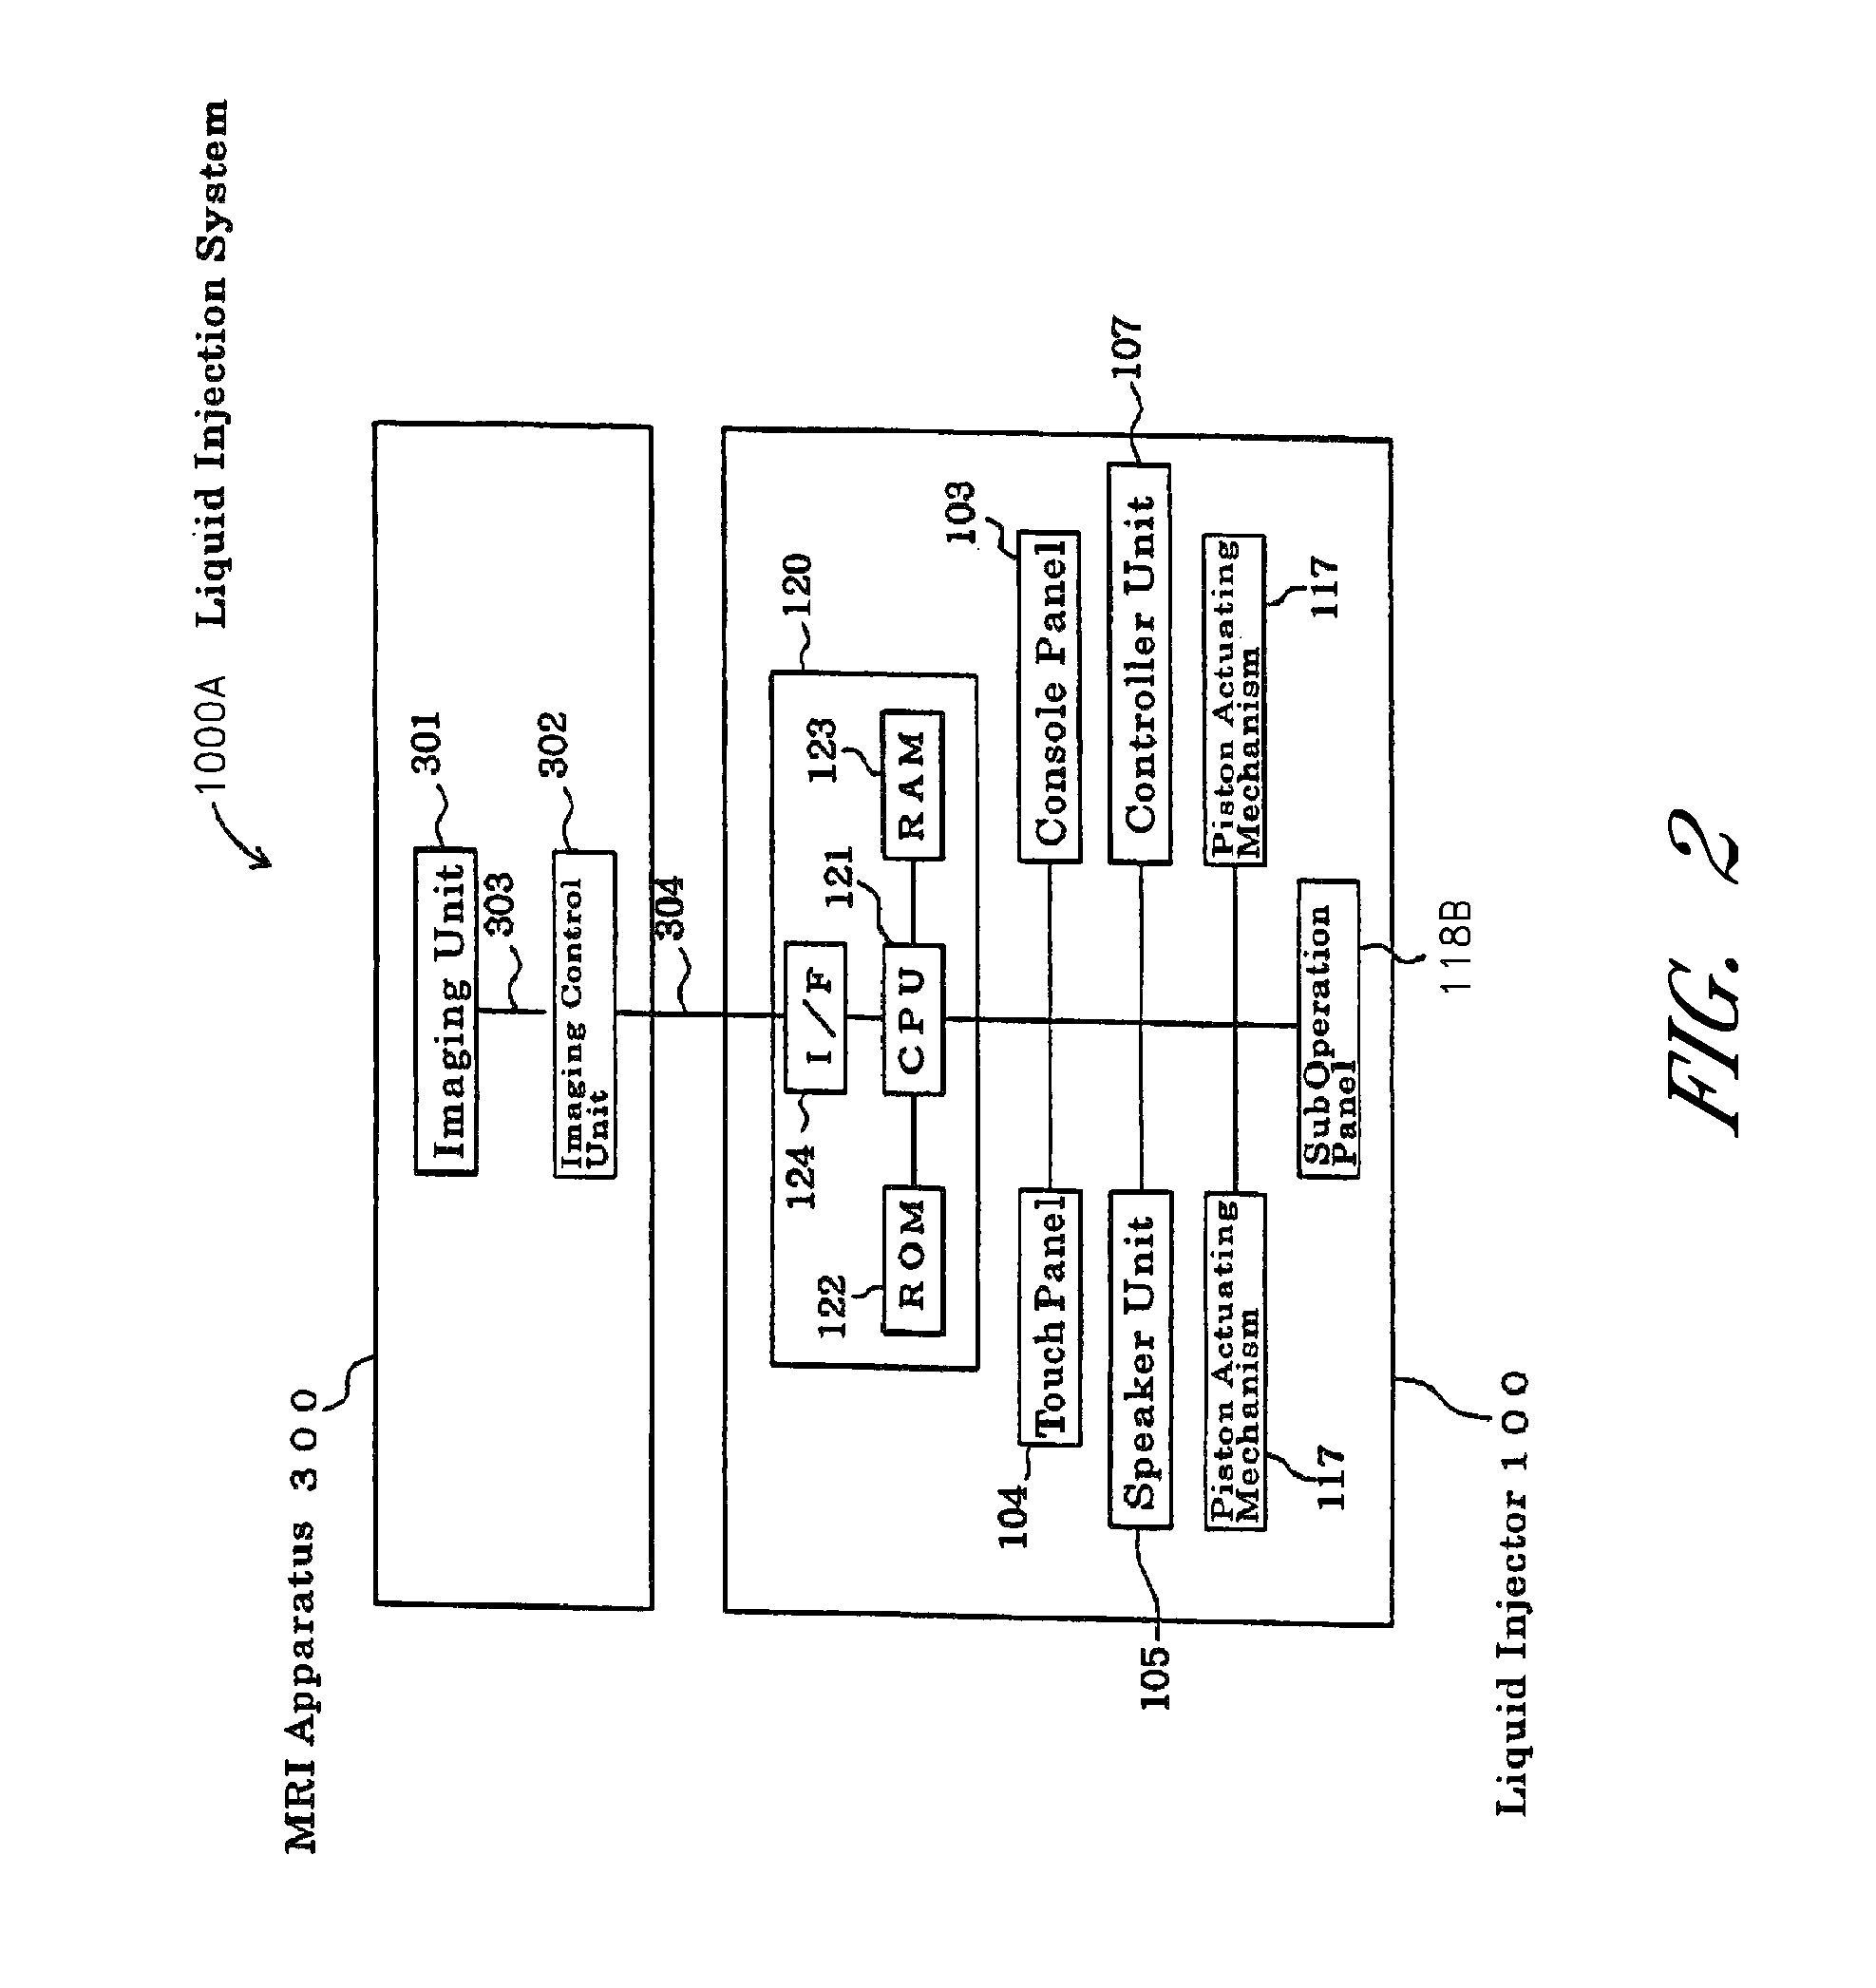 Liquid injector displaying input injection condition as image